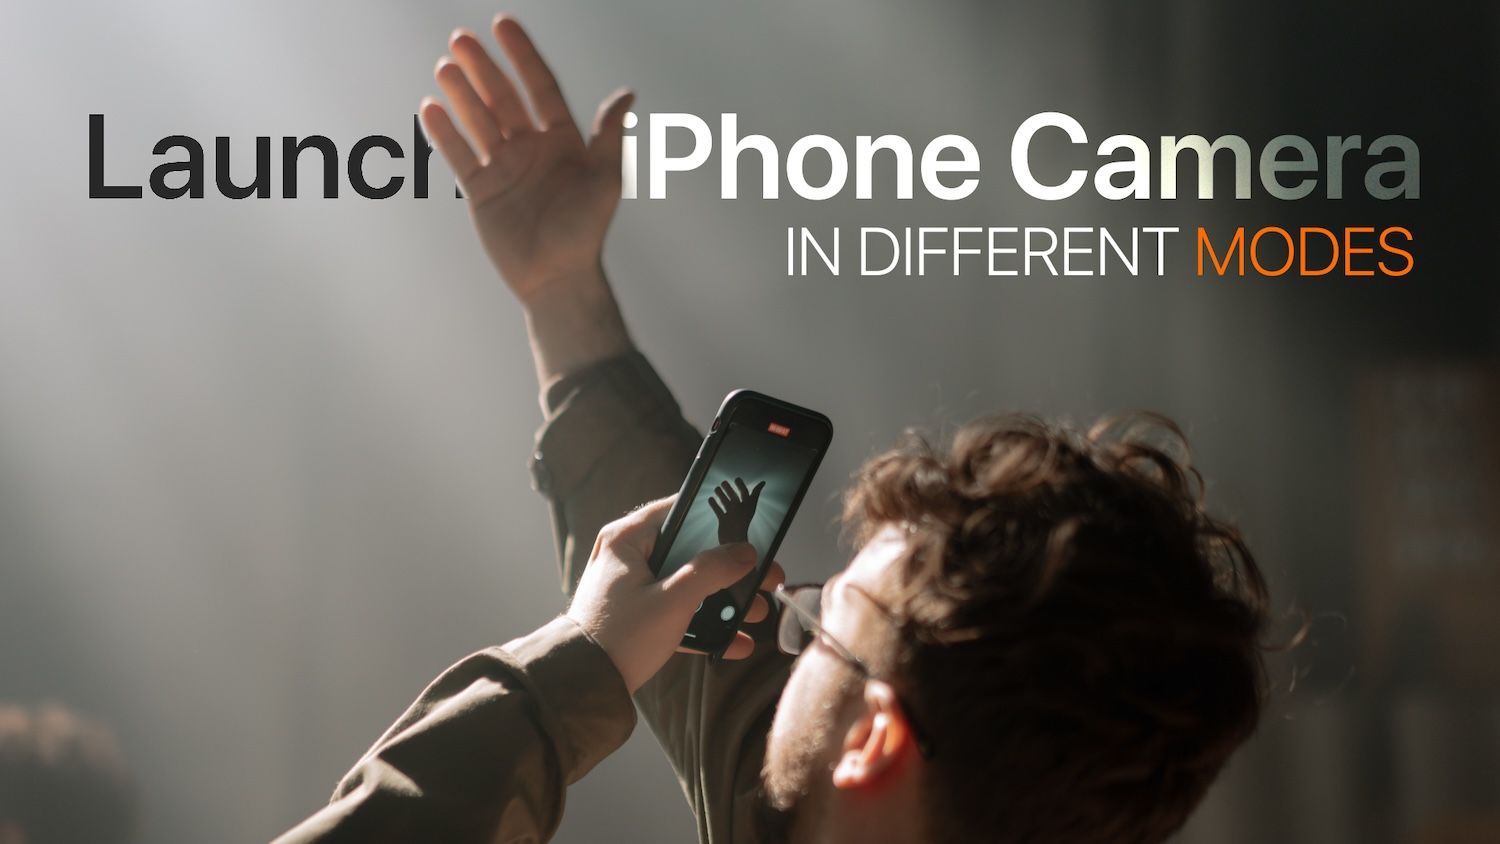 How to Launch iPhone Camera in Different Modes Using Shortcut